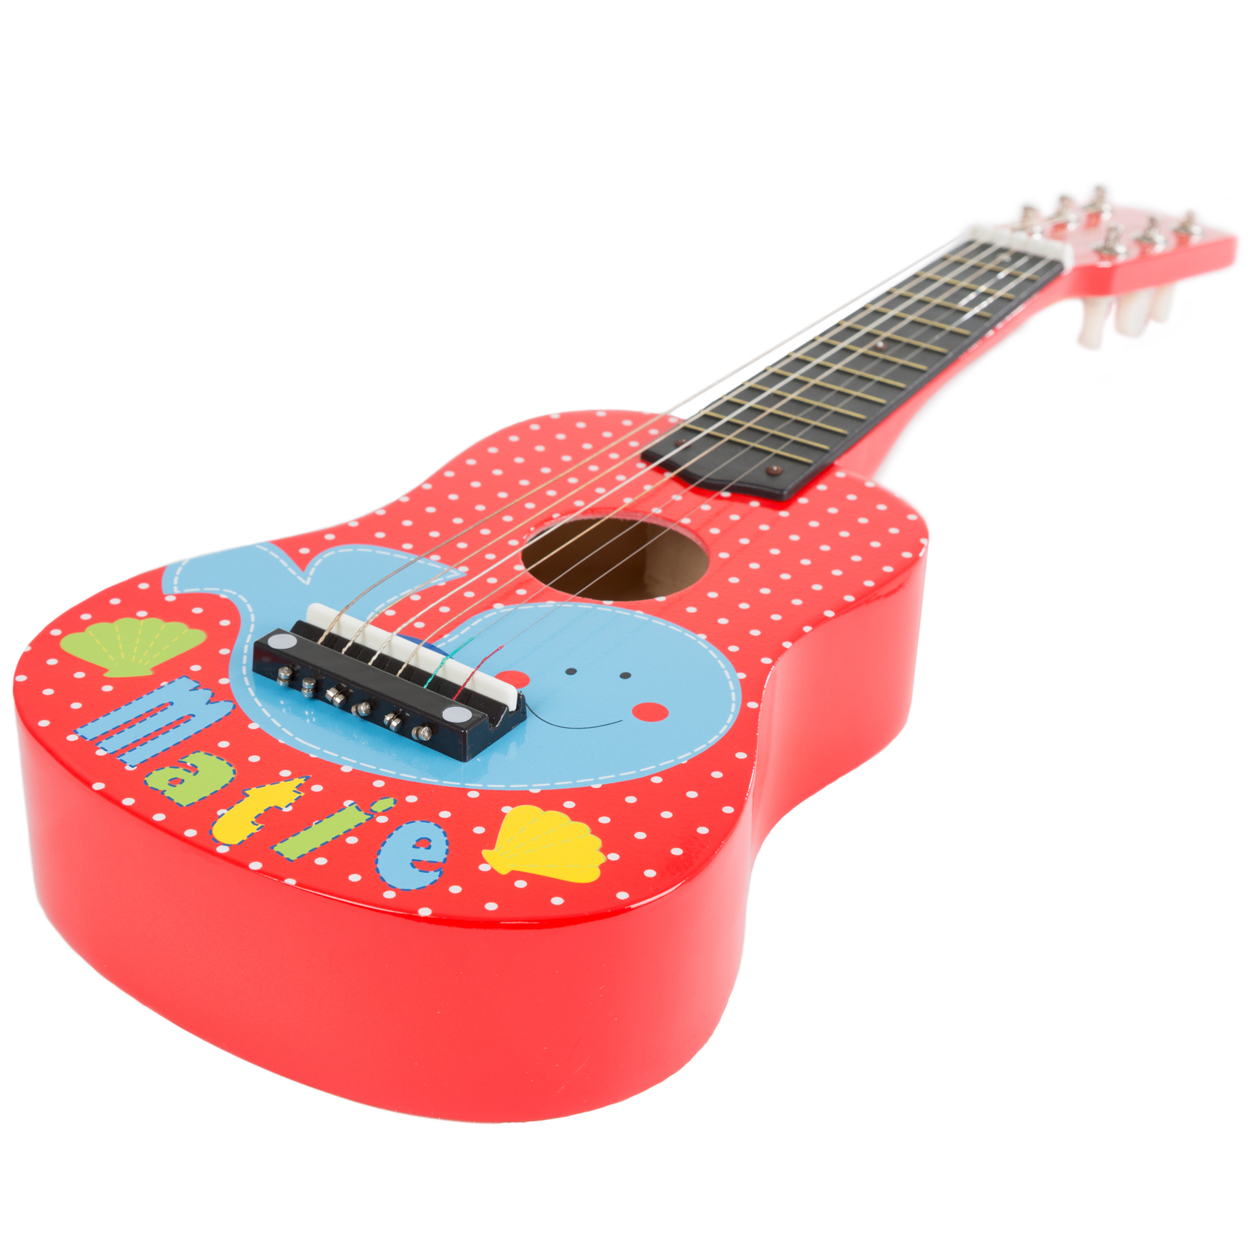 Toy Acoustic Guitar With 6 Tunable Strings And Real Musical Sounds